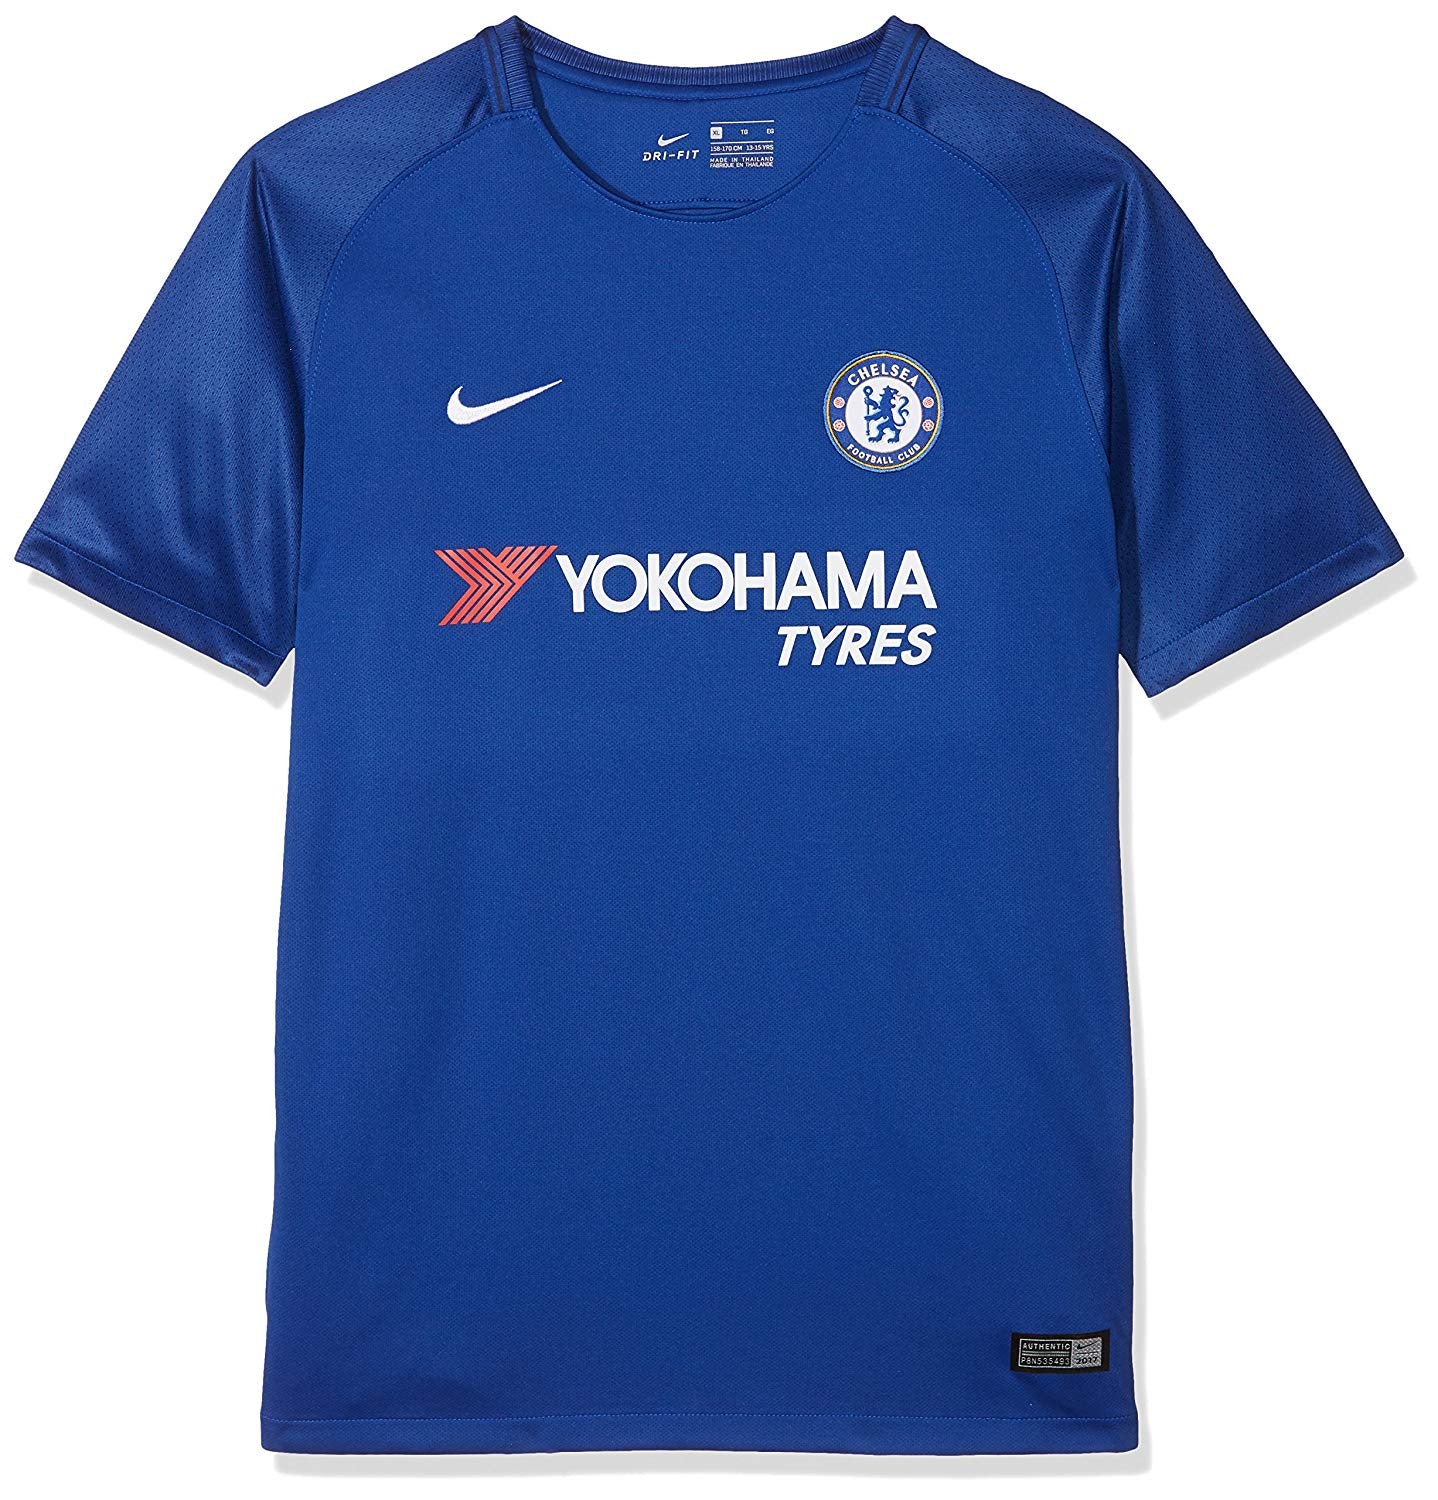 Youth Chelsea Football Club Nike Soccer Jersey